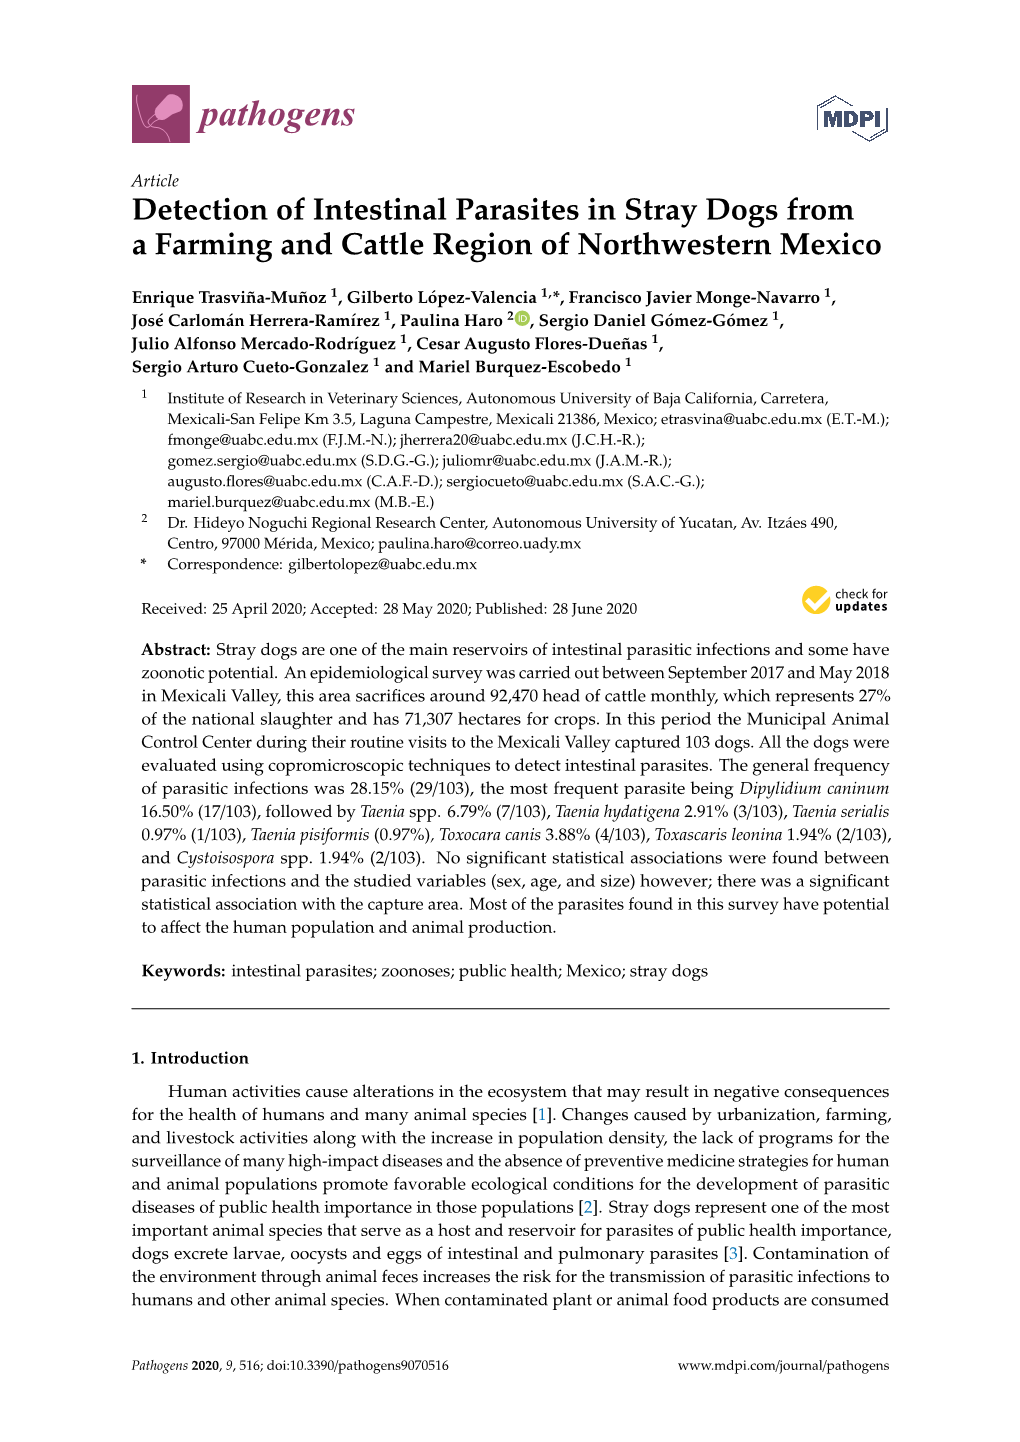 Detection of Intestinal Parasites in Stray Dogs from a Farming and Cattle Region of Northwestern Mexico